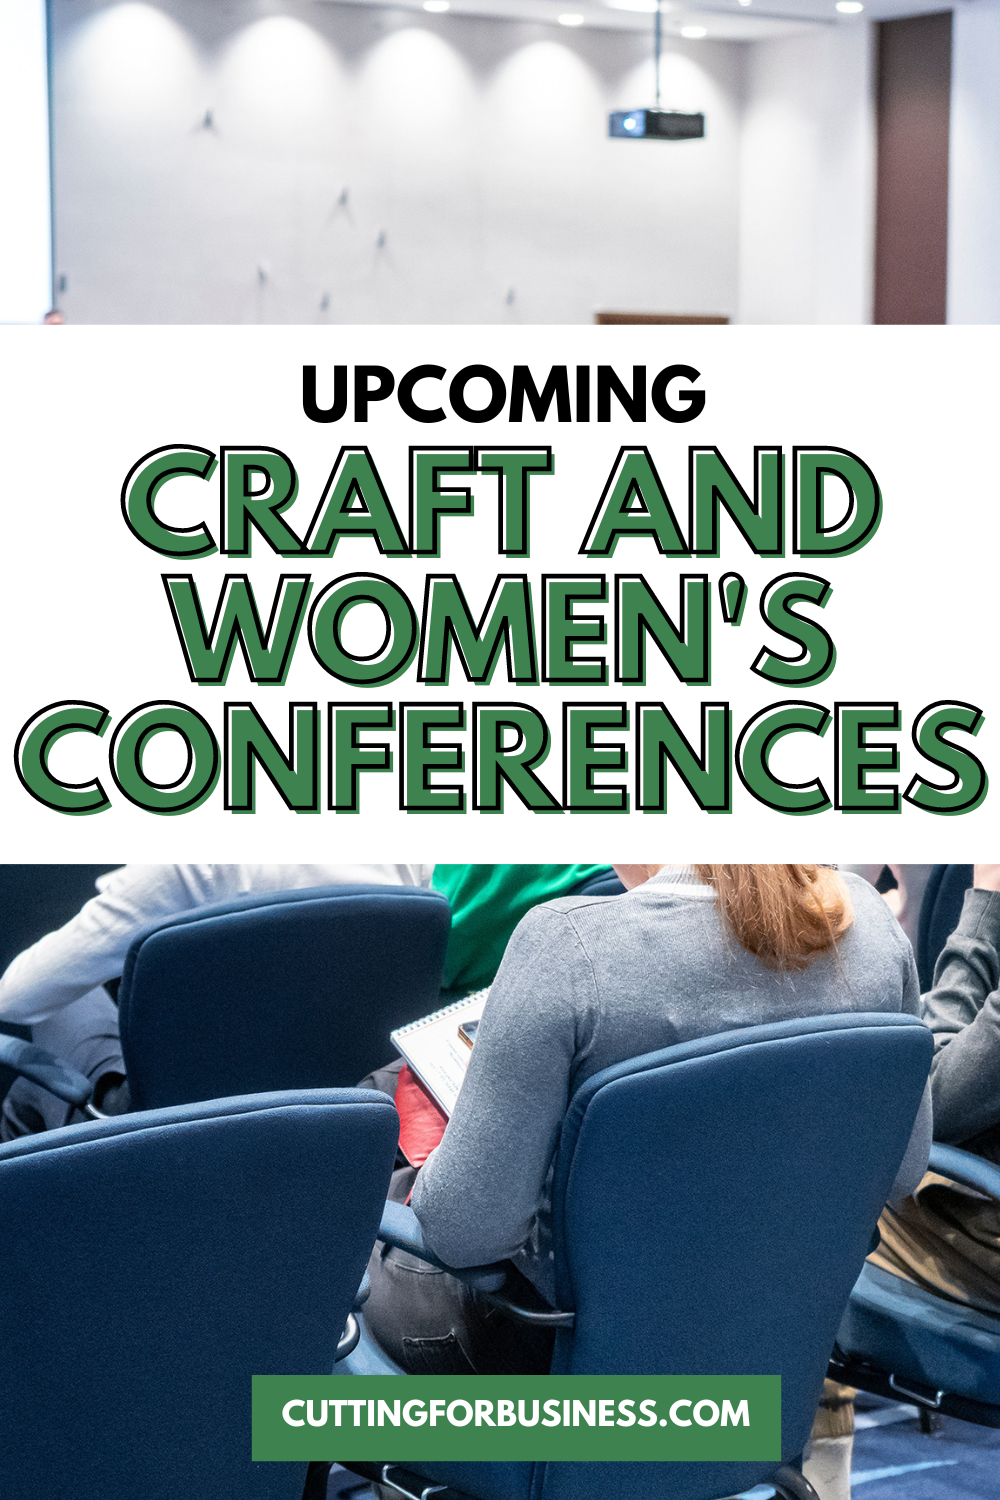 List of Craft and Women's Conferences - cuttingforbusiness.com